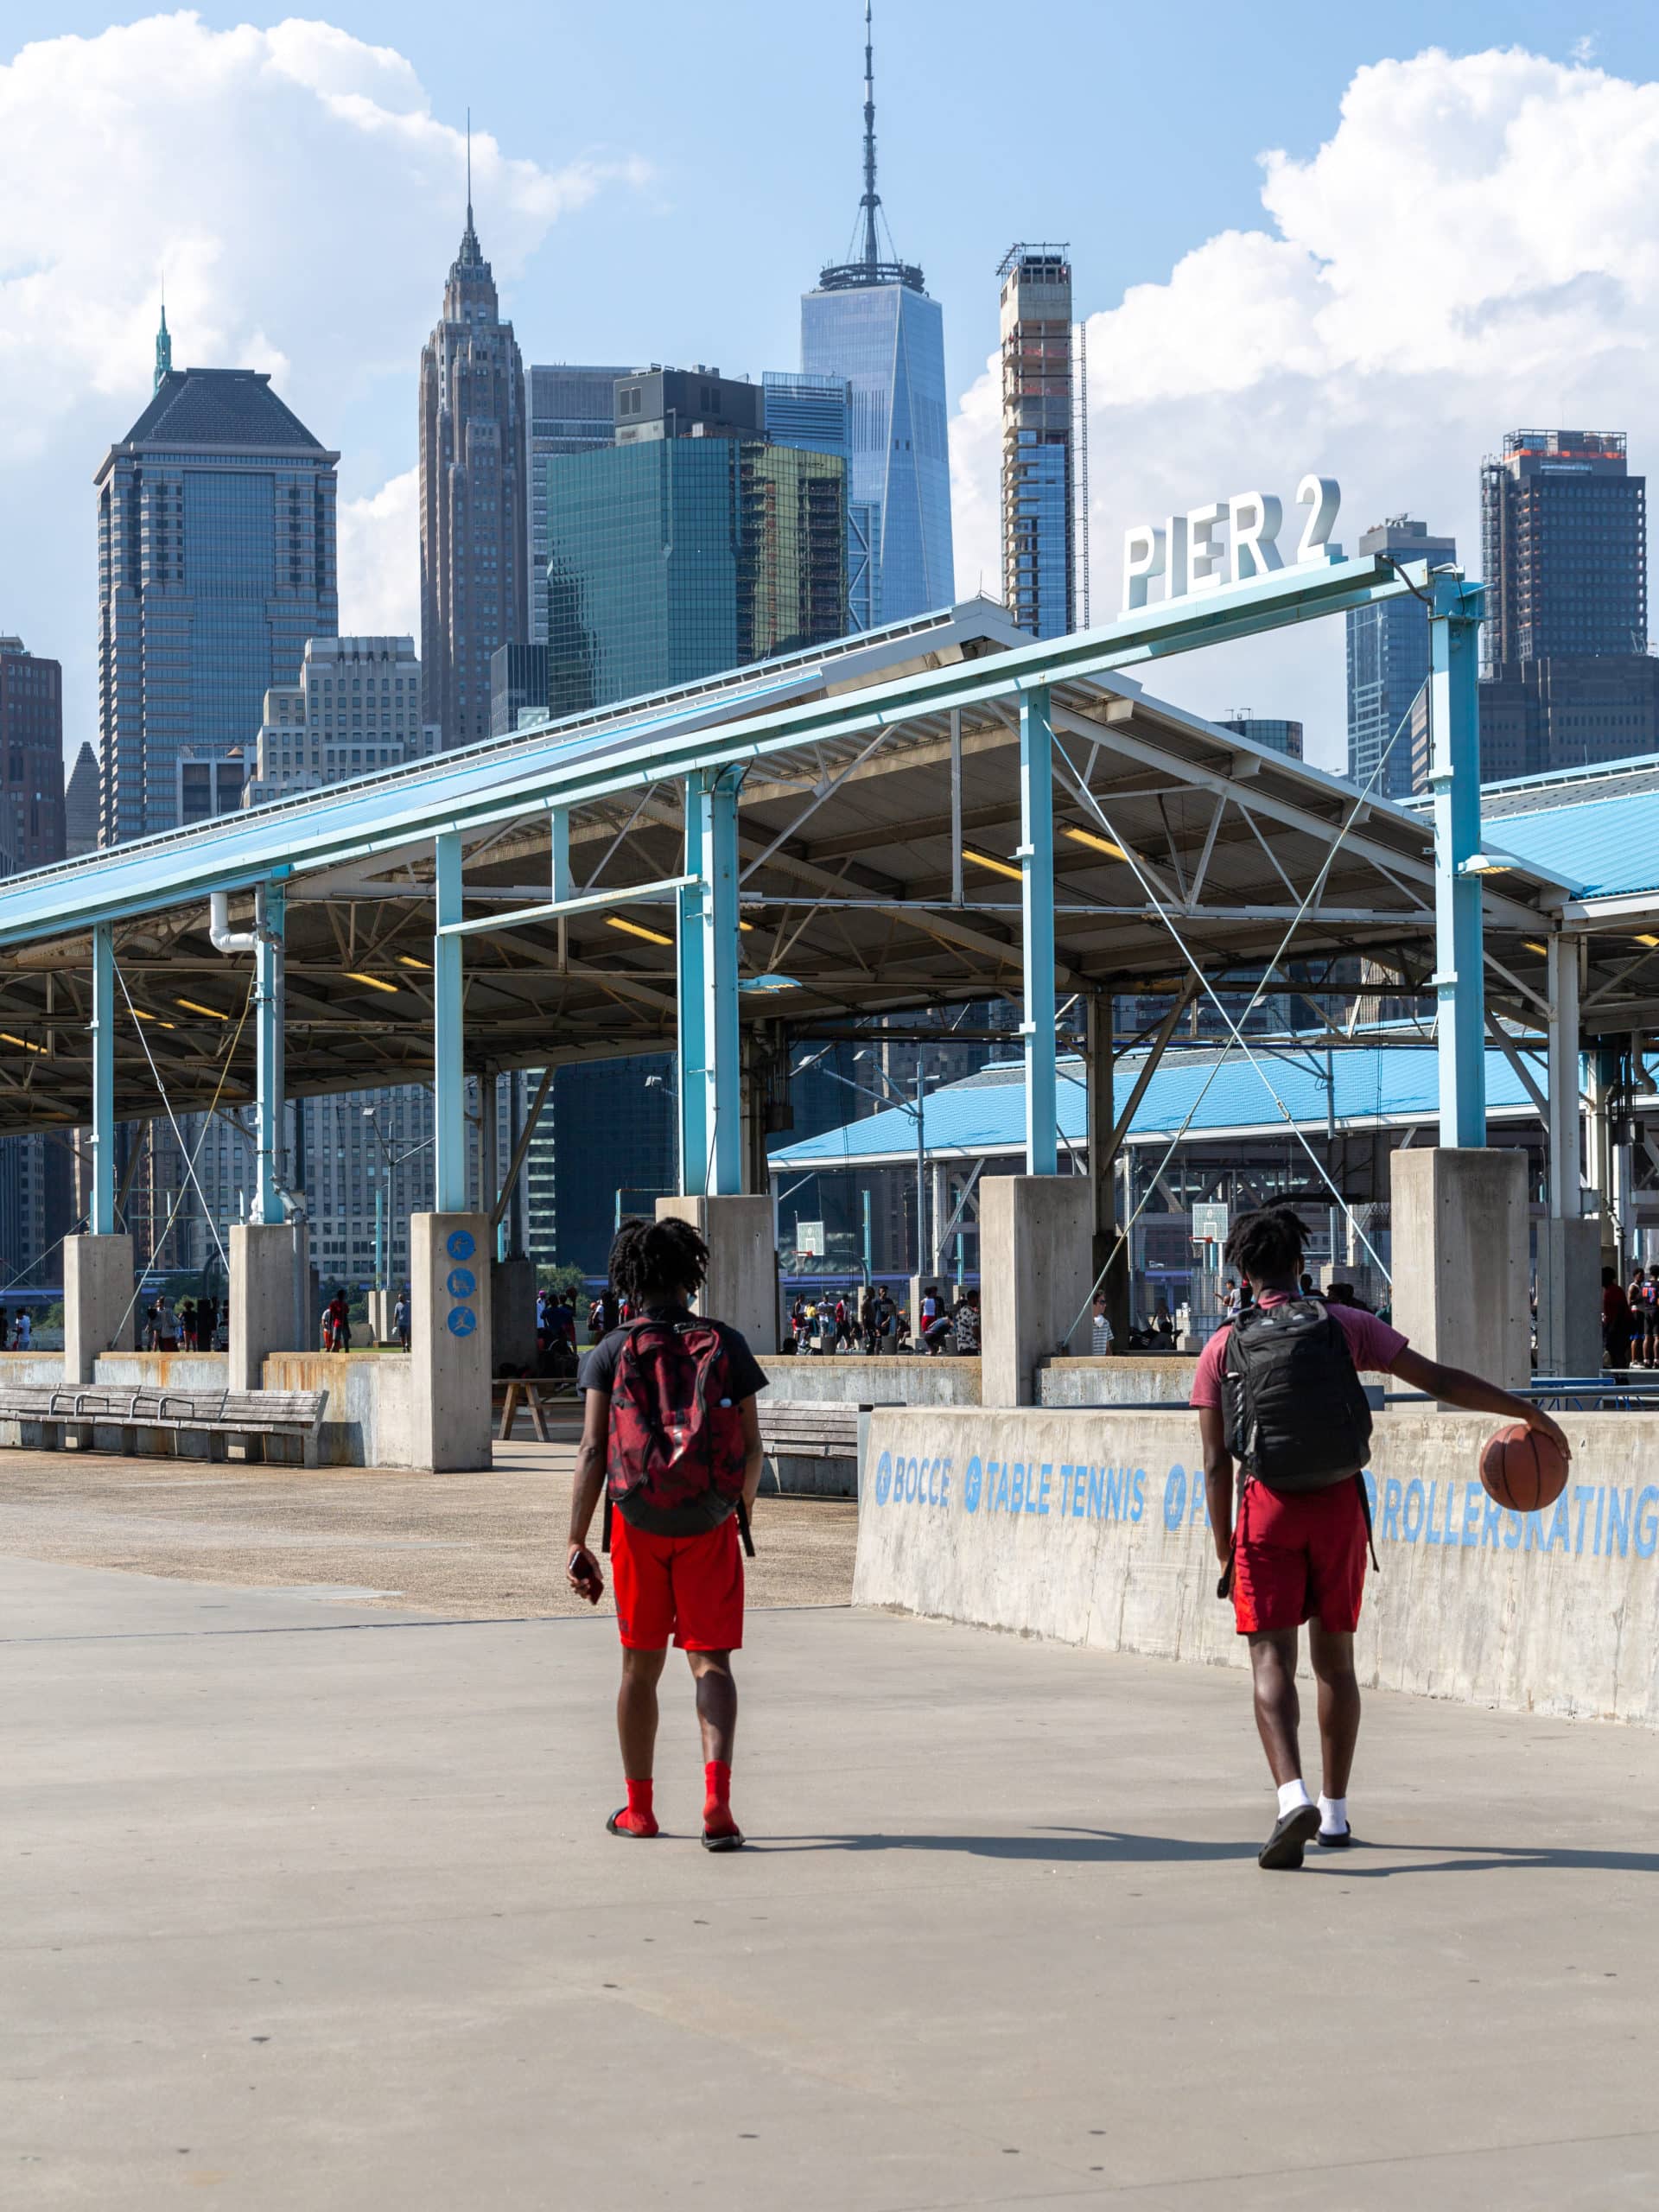 A man dribbles a basketball as he and another man walk towards Pier 2 on a sunny day.